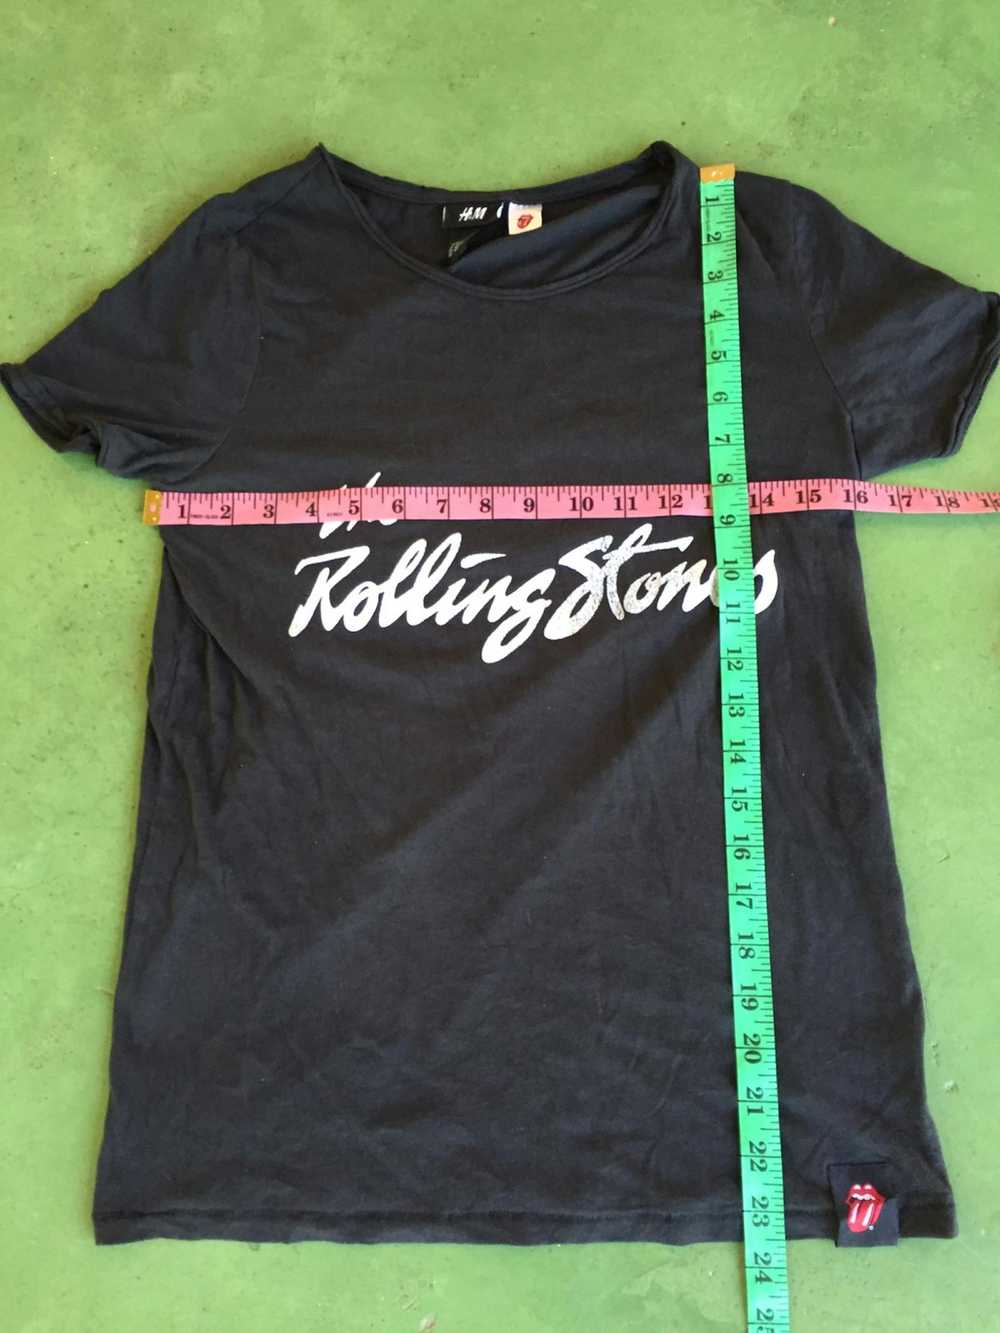 Band Tees H&M x The Rolling Stones tee - image 6